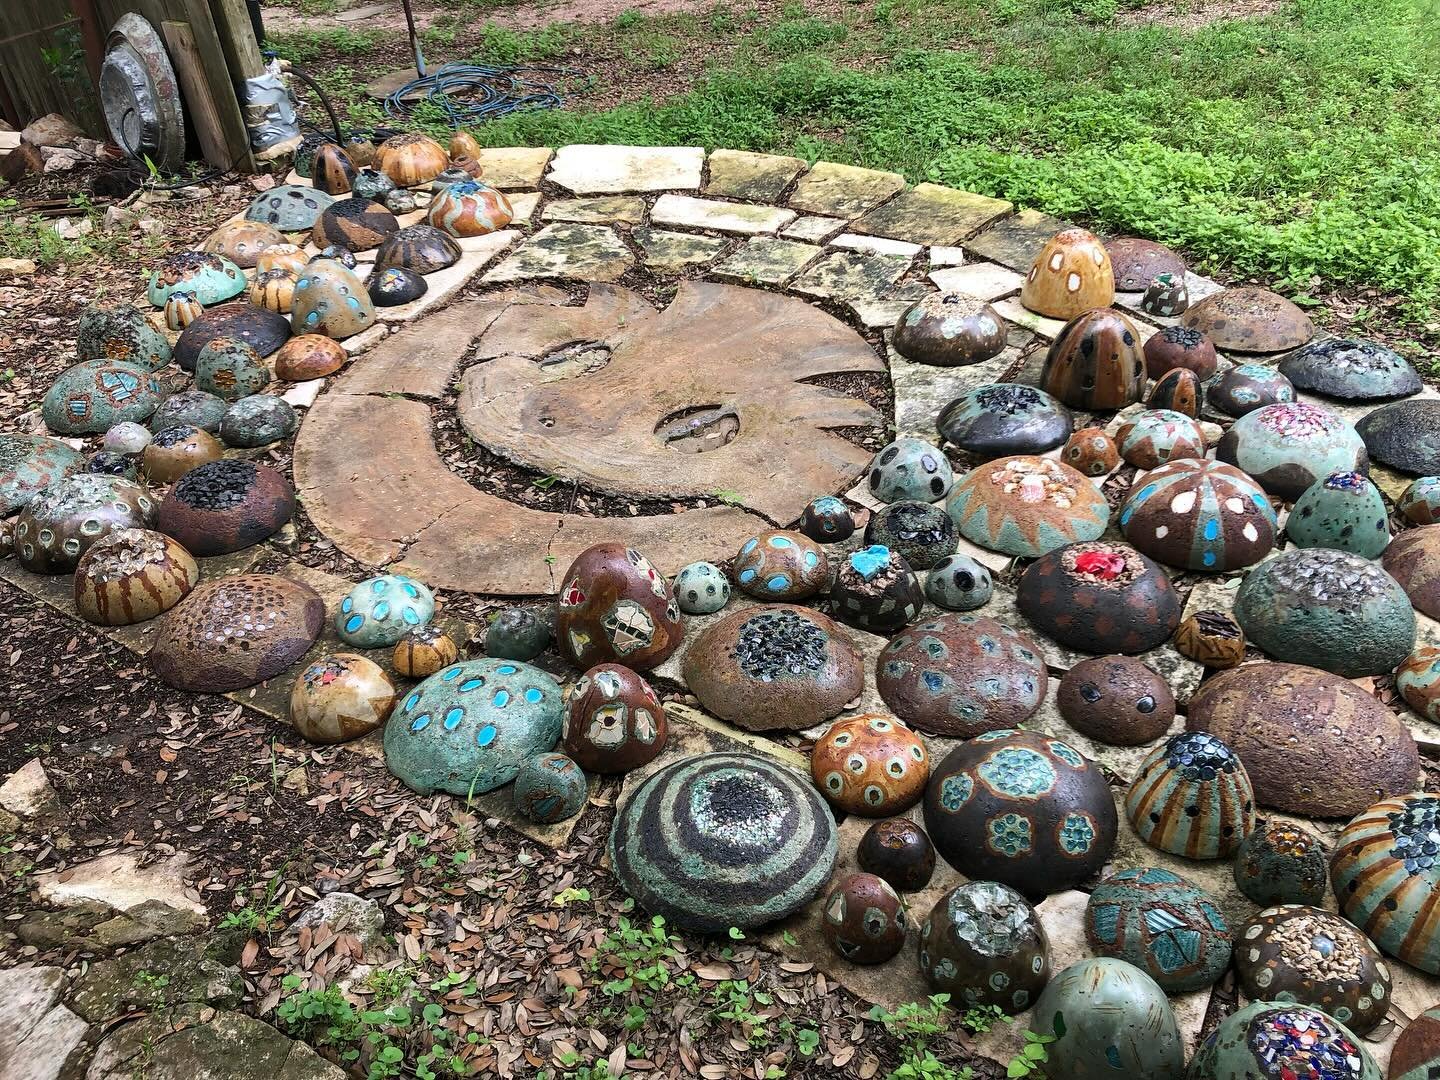 Sign up today for the Solstice Studio&rsquo;s next acid-stained concrete MUSHROOM CLASS!  During this two-day class, Solstice artist Wade Beesley will lead participants in the design, decoration, and pouring of concrete mushroom sculptures on Friday,